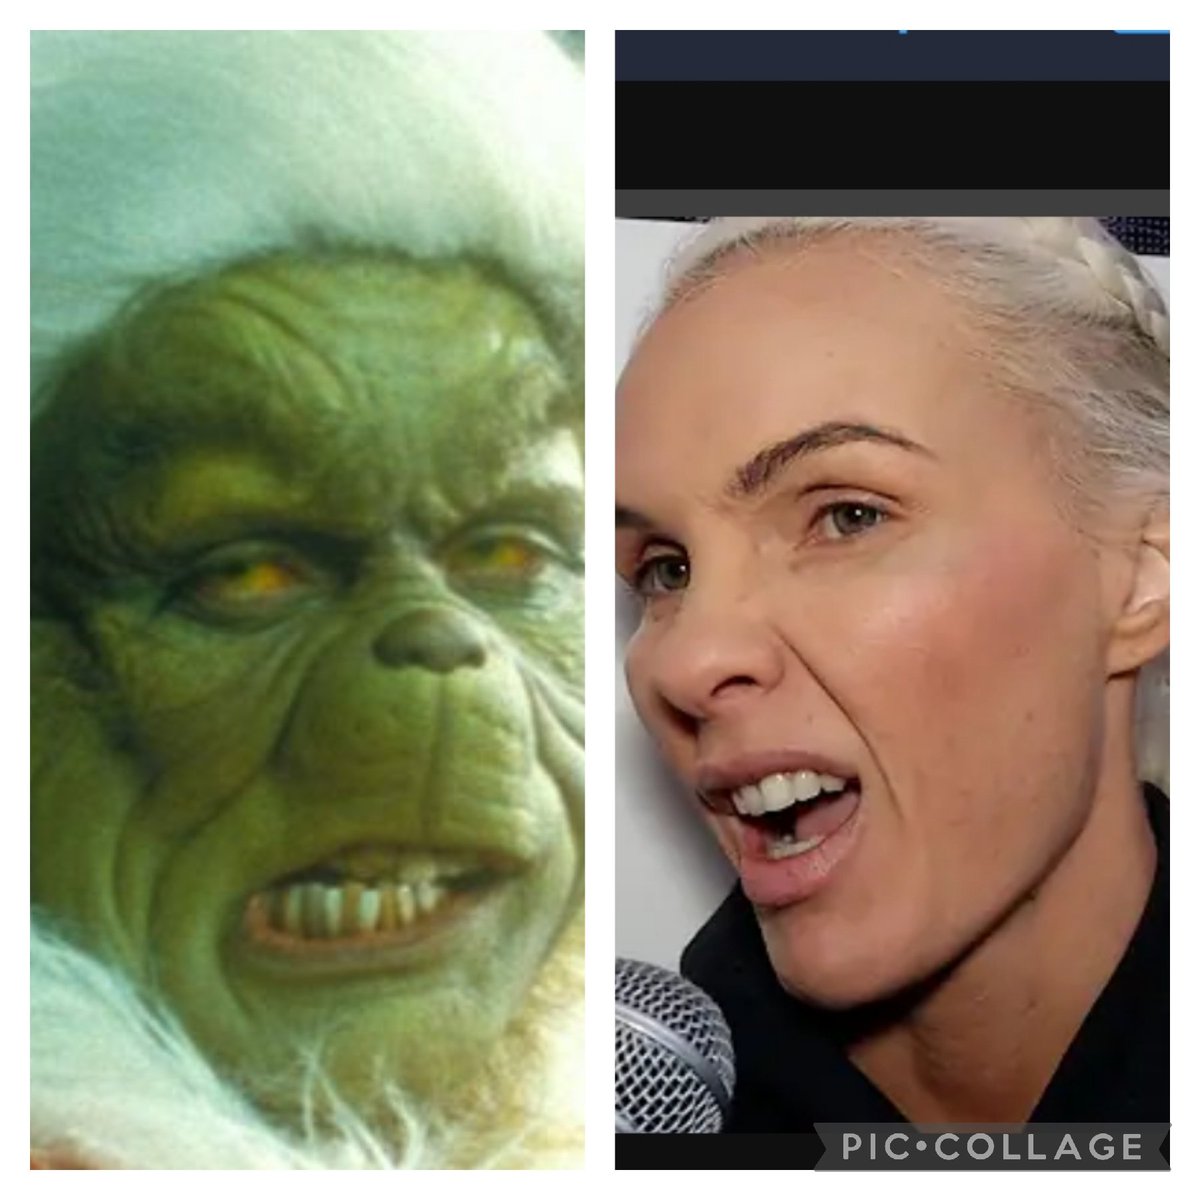 Anyone see the resemblance? I think @boxing_social did Shotgun dirty on that thumbnail 😄 @EbanieBridges even the Grinch grew a heart, so once you Beat Shannon....maybe she'll warm to you Even go for some stripper lessons 😁